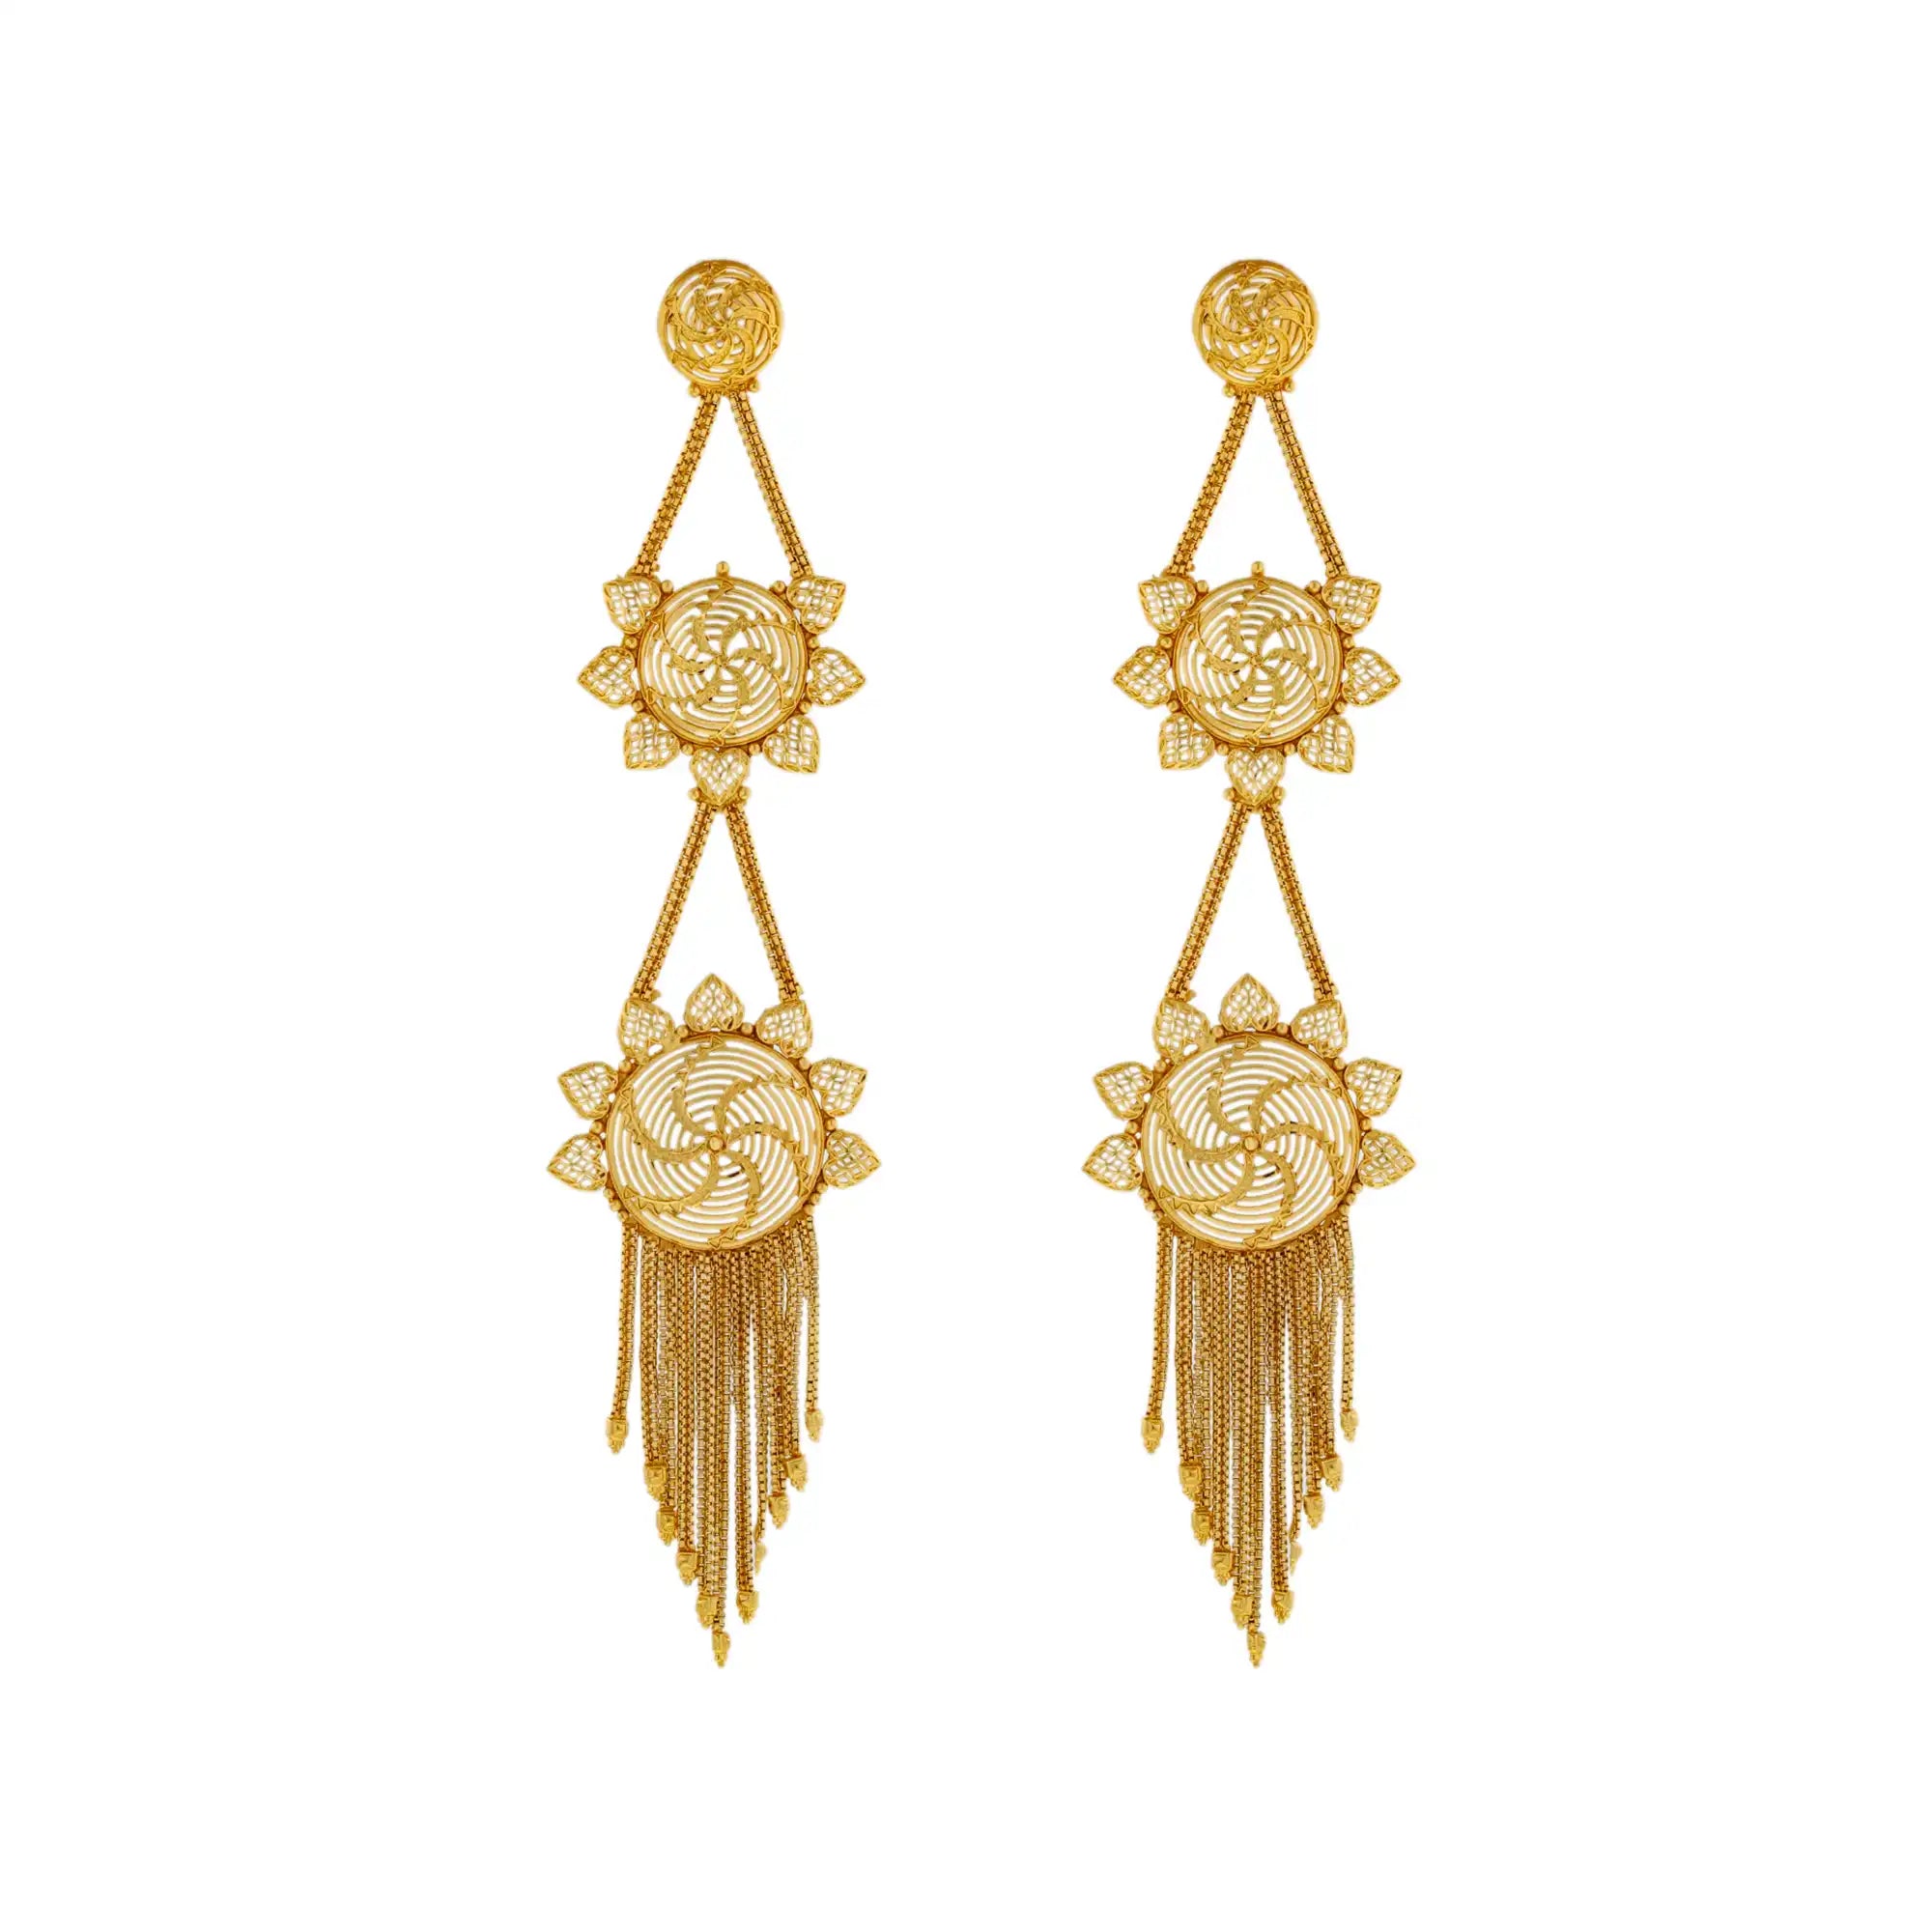 large statement earrings, Best Gift for Her, Earrings for sarees, indian jewelry mall, gold-plated jewelry